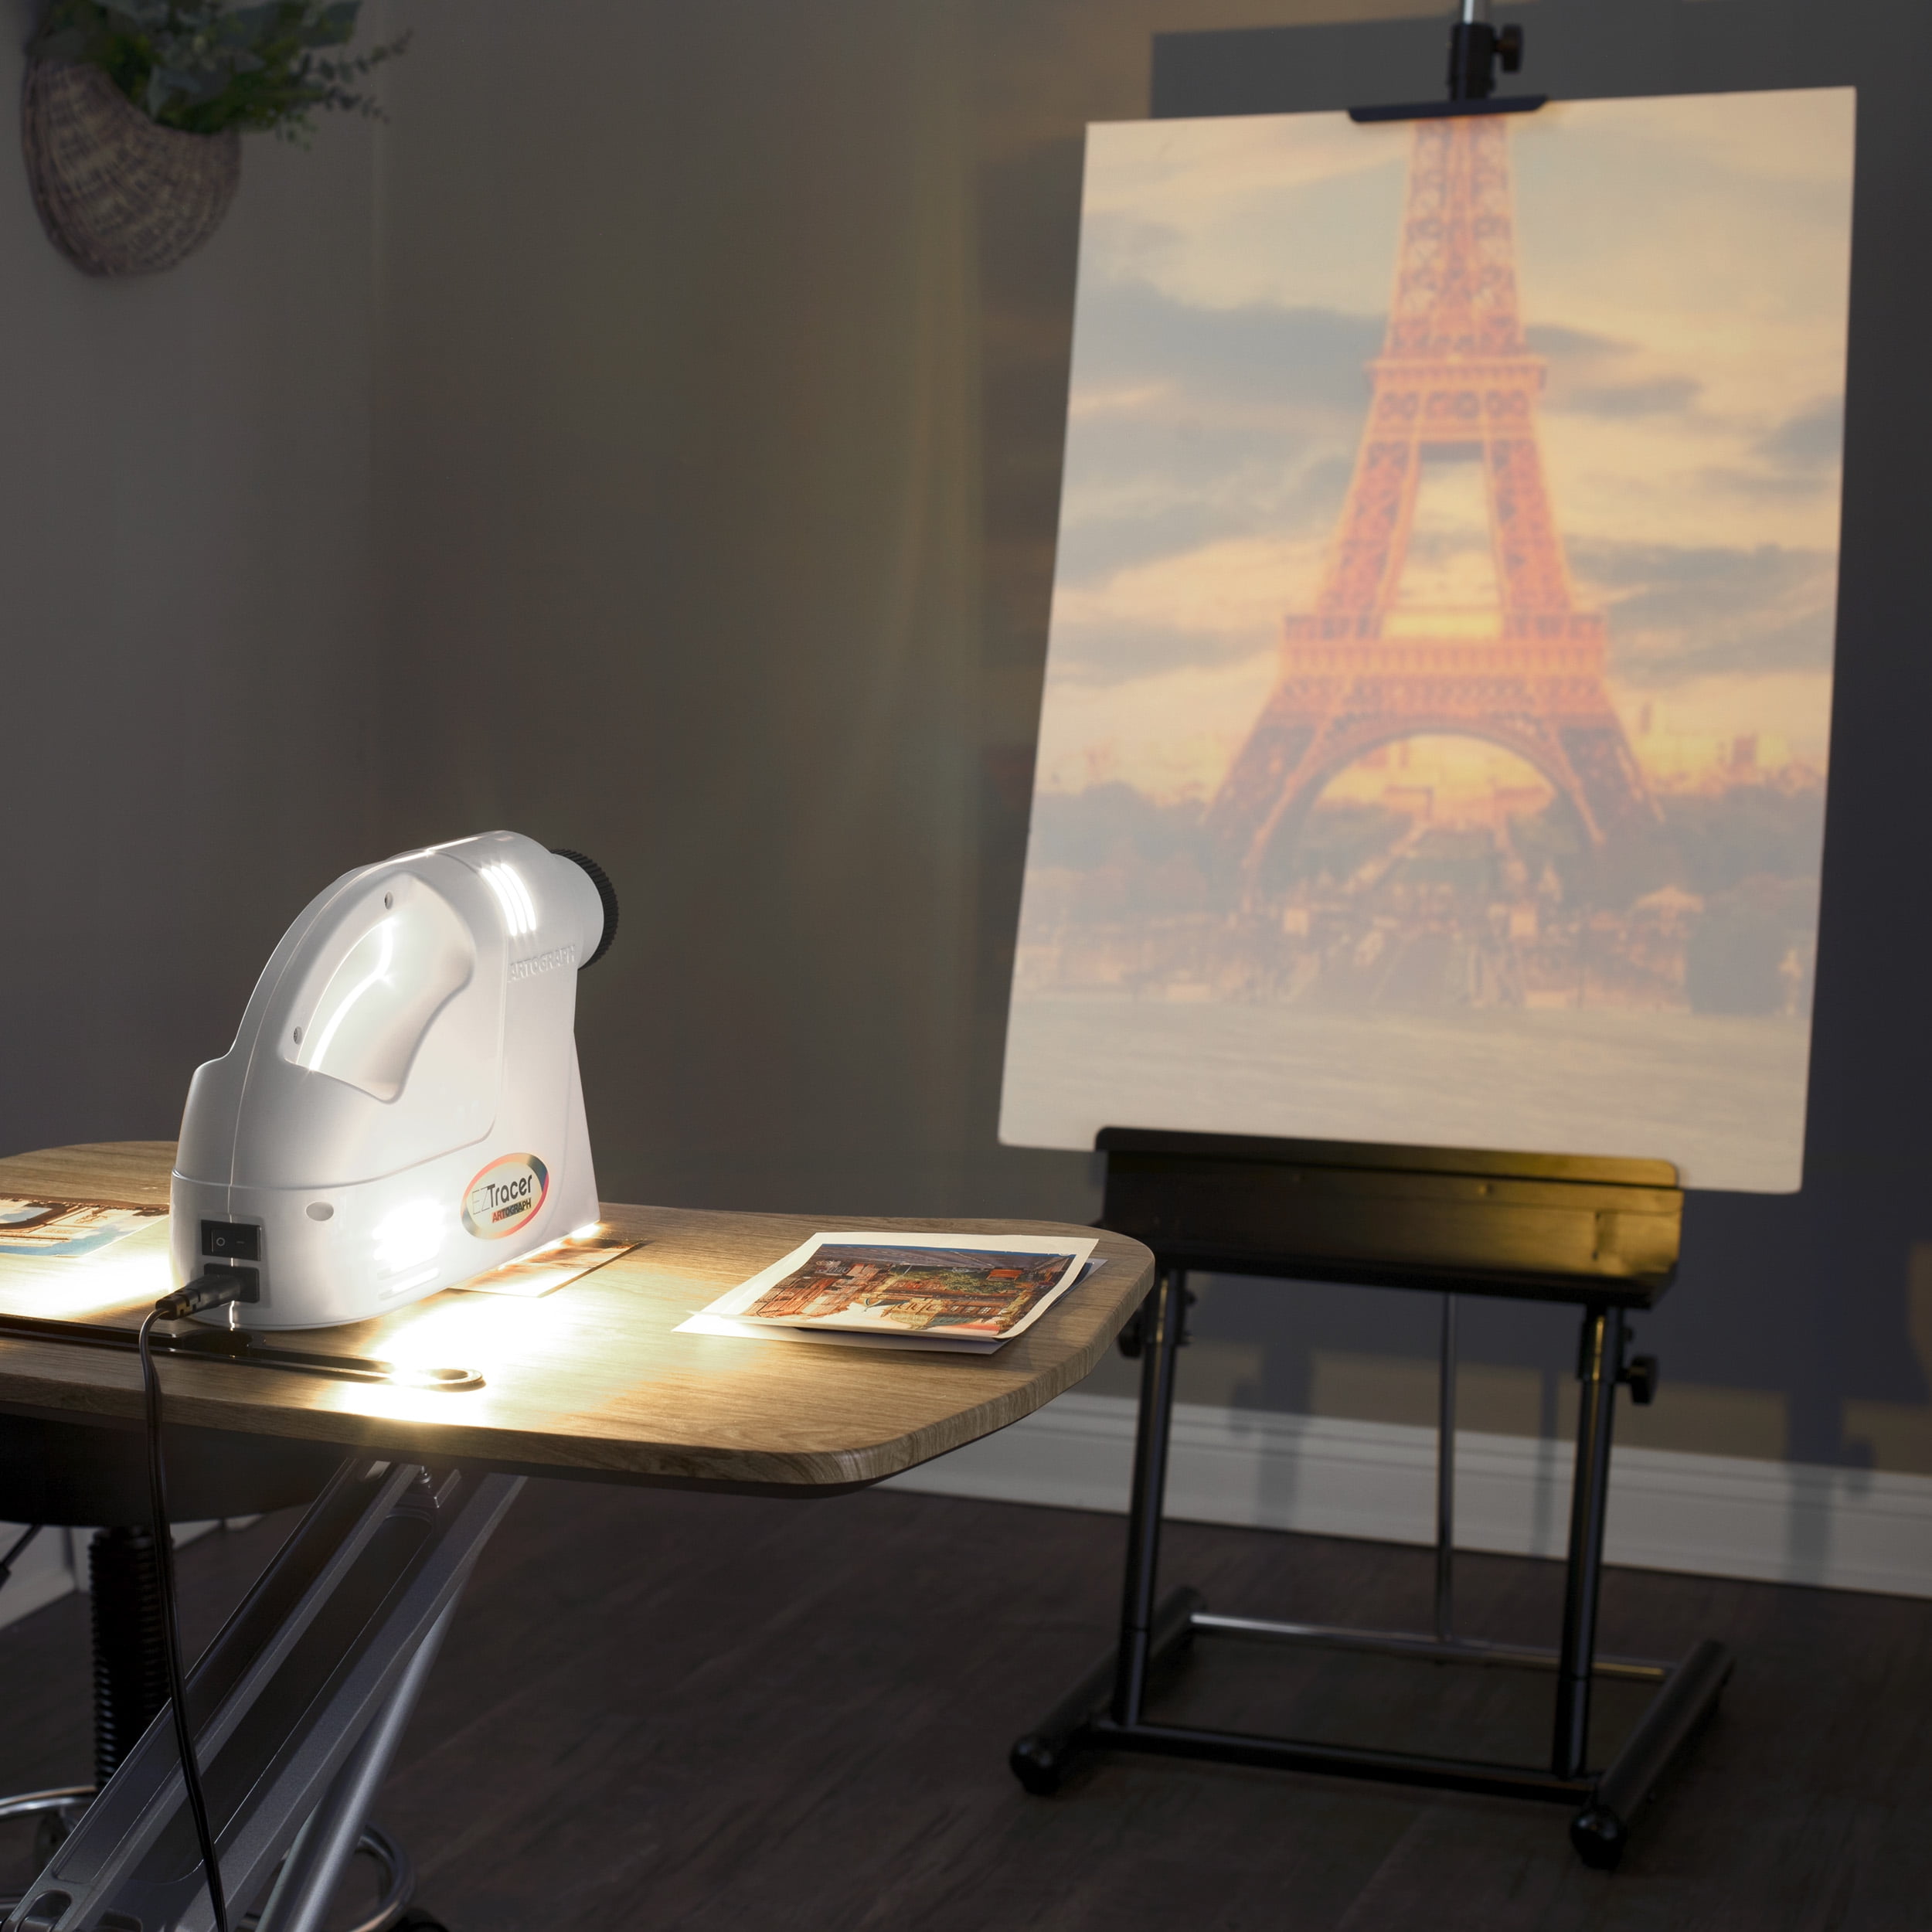 Art Projector Guide: How to Use Different Art Projectors to